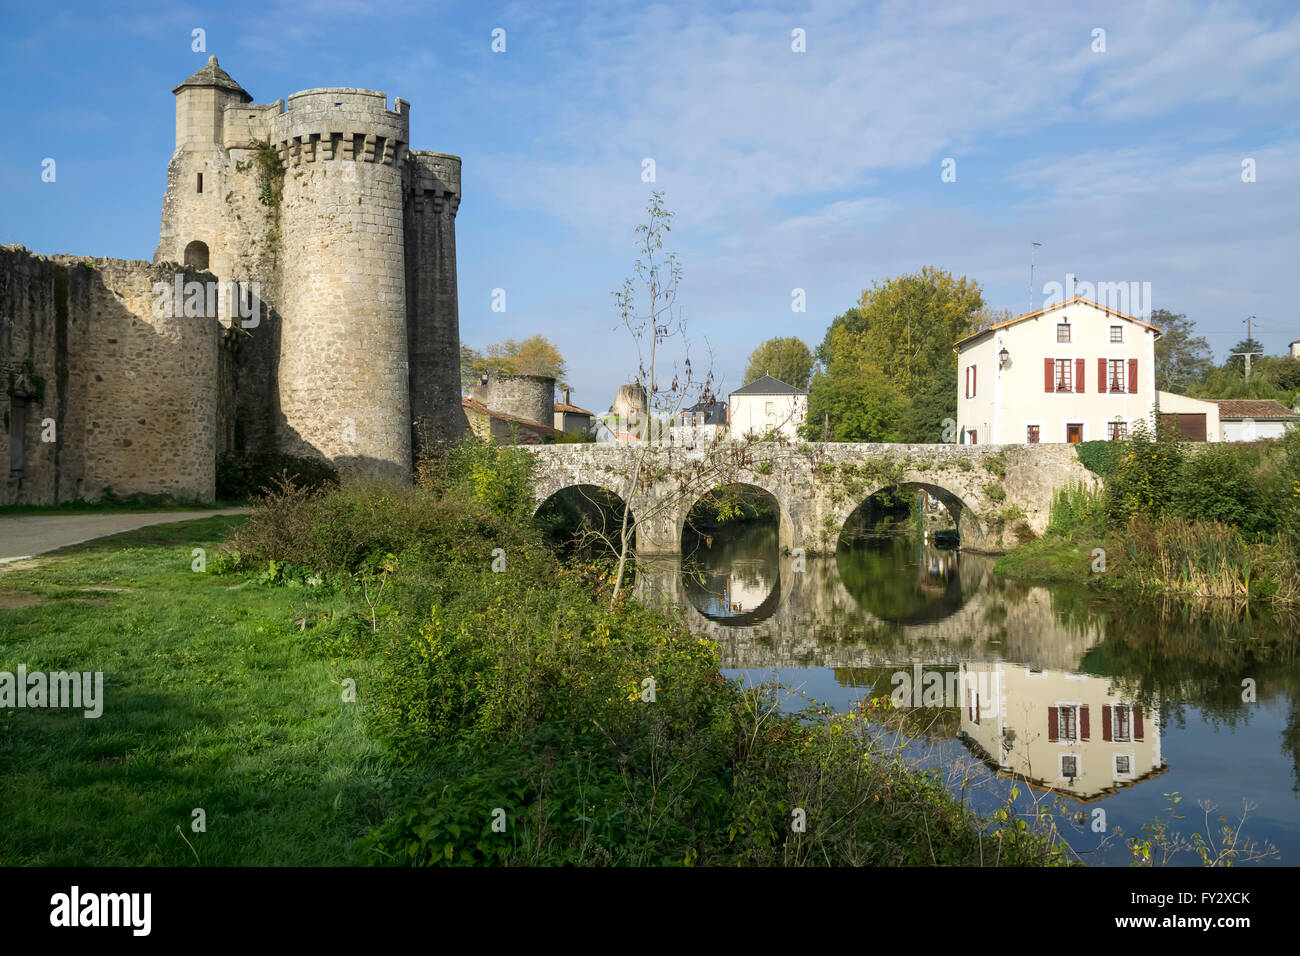 St Jacques Bridge and Gate over the River Thouet in Deux-Sevres, France Stock Photo